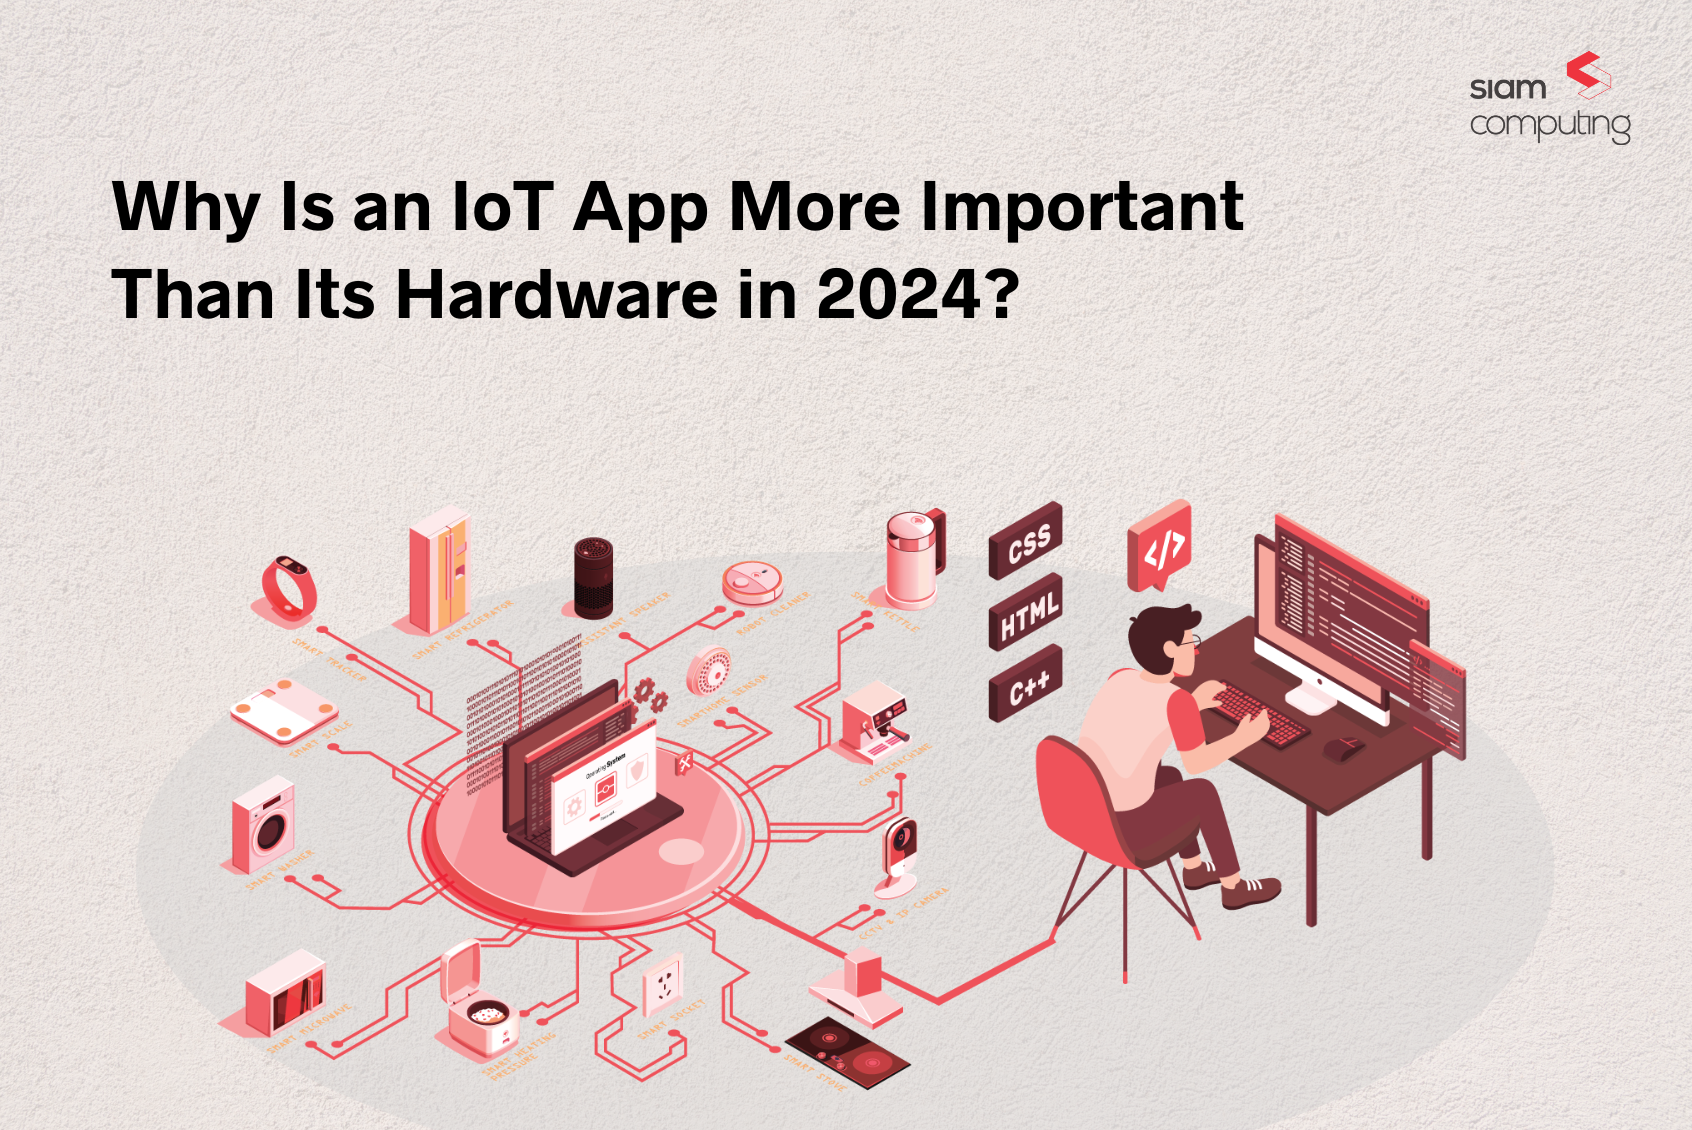 Why Is an IoT App More Important Than Its Hardware in 2024?